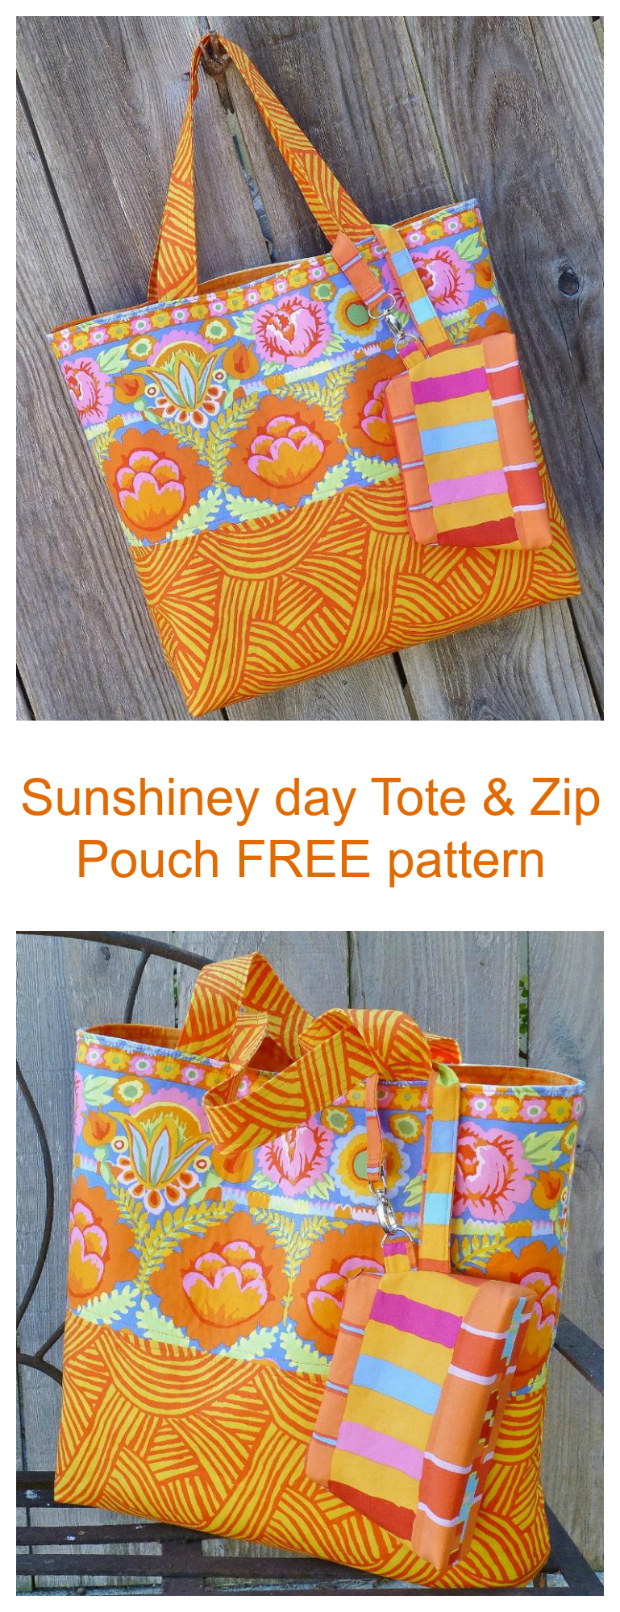 Sunshiney Day Tote & Zip Pouch sewing pattern